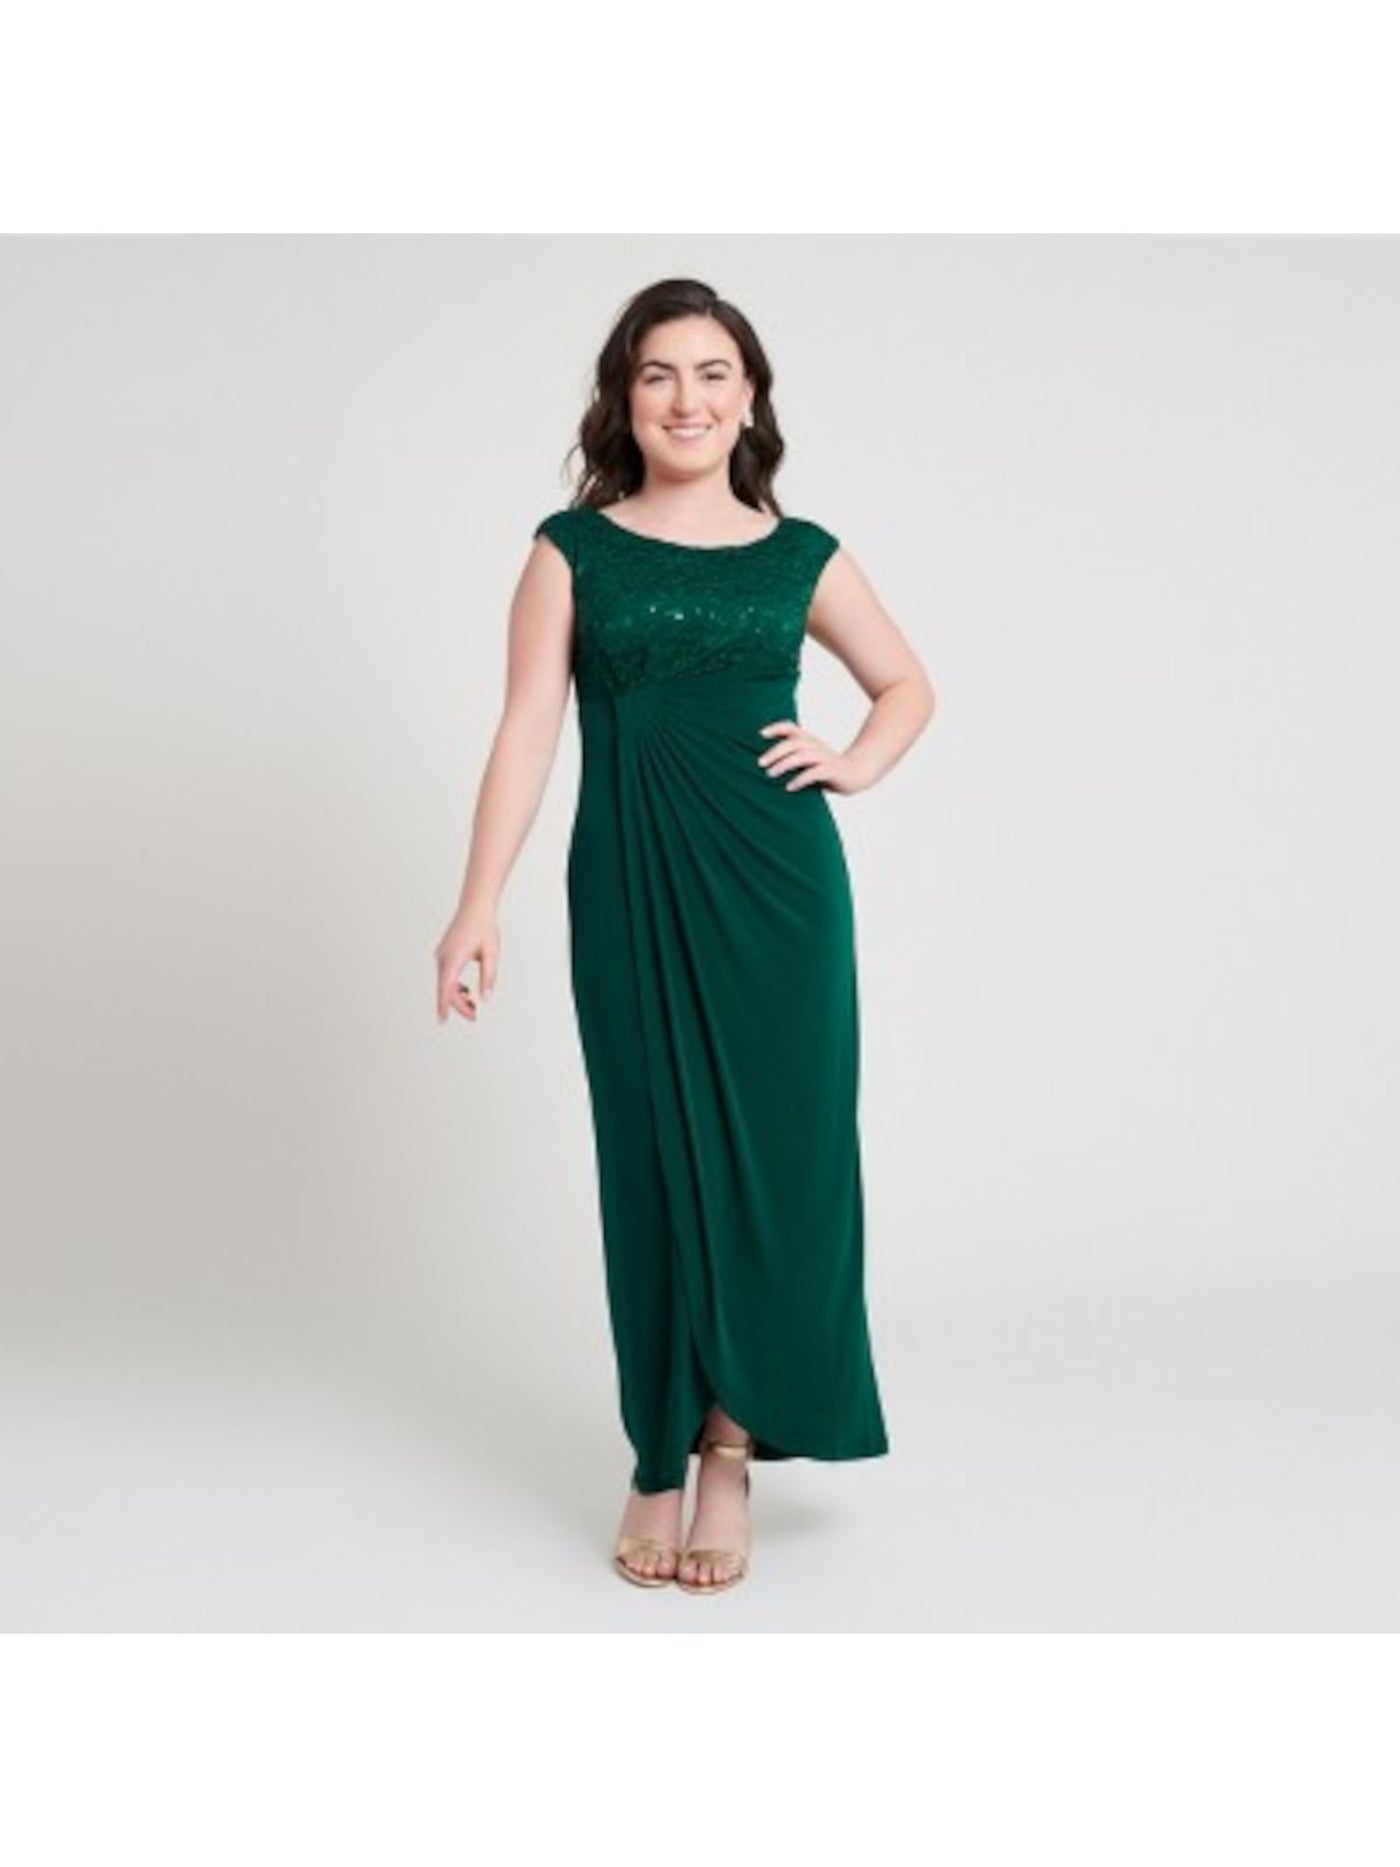 CONNECTED APPAREL Womens Green Embellished Slitted Sleeveless Jewel Neck Full-Length Evening Faux Wrap Dress 12